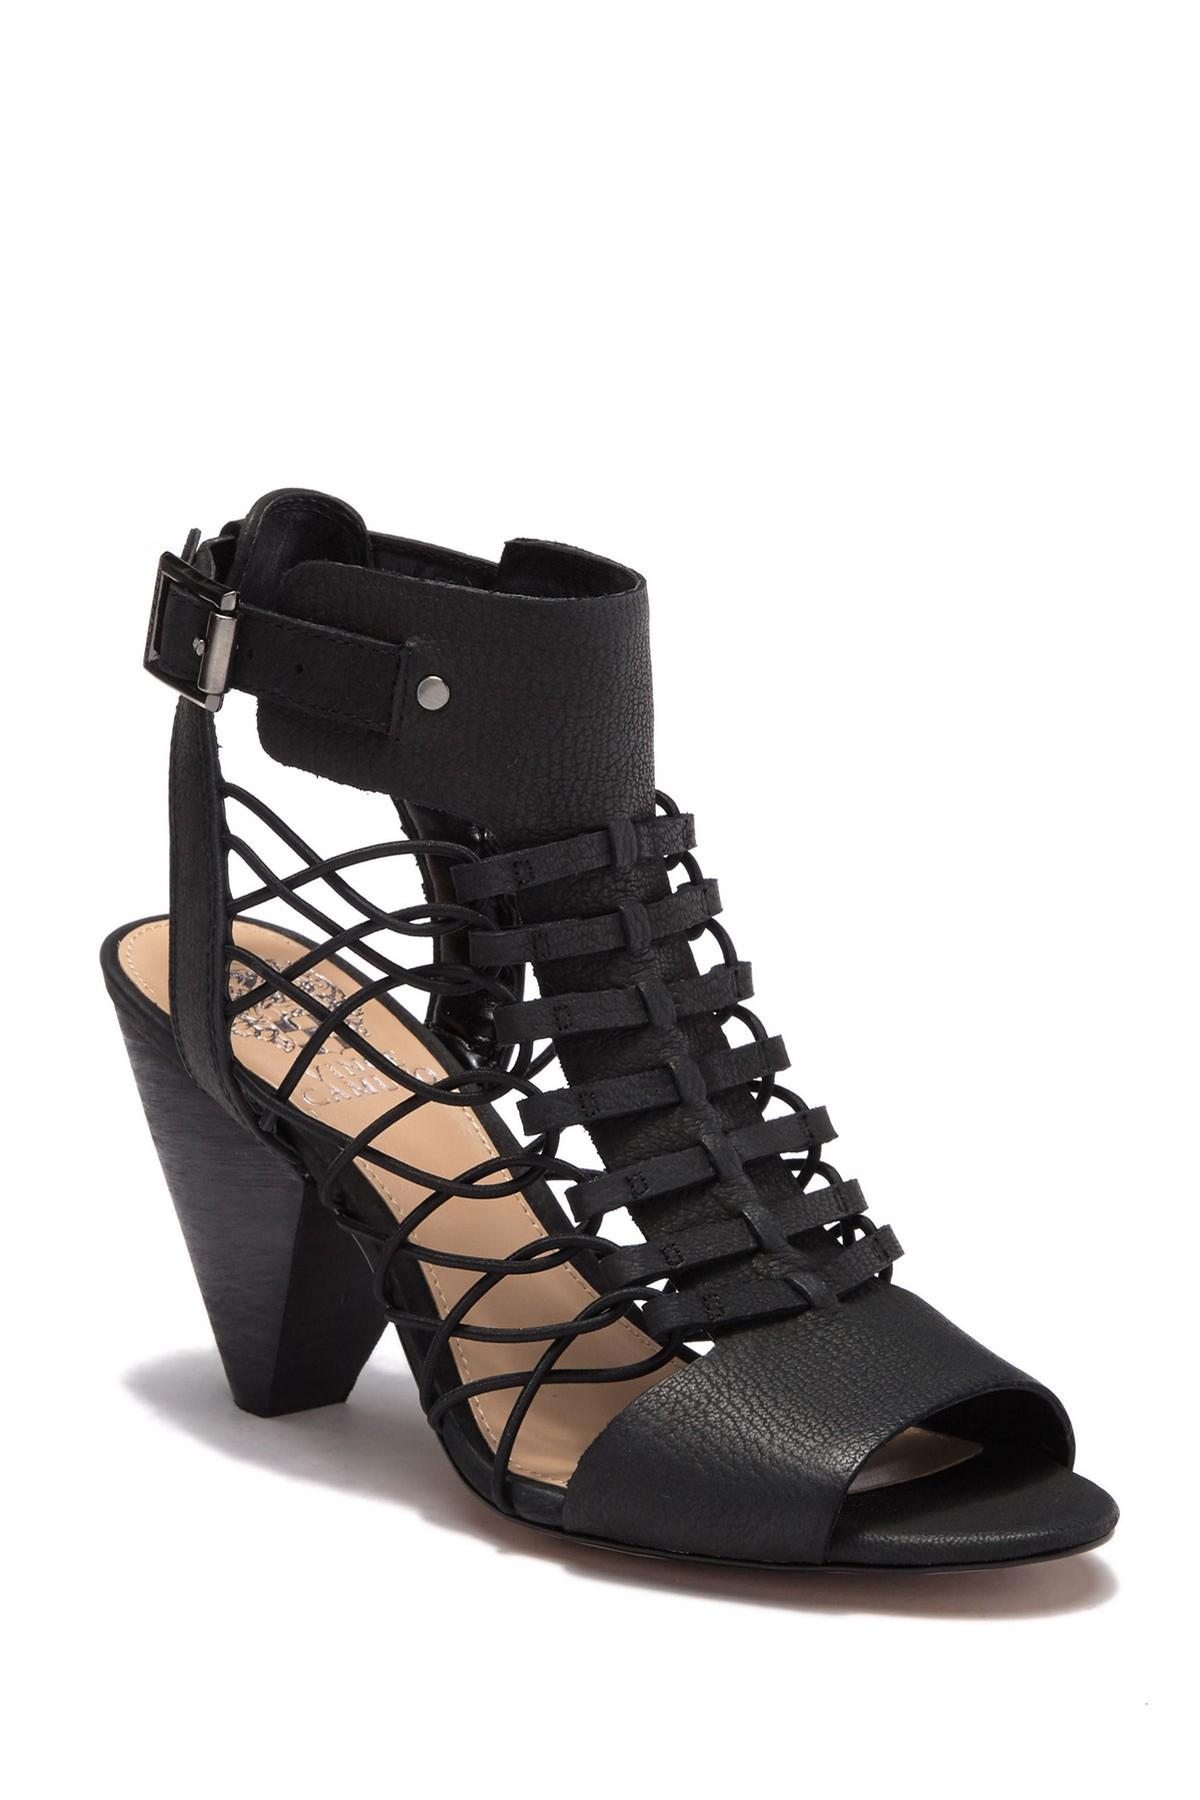 Vince Camuto Evel Caged Sandal in Black | Lyst